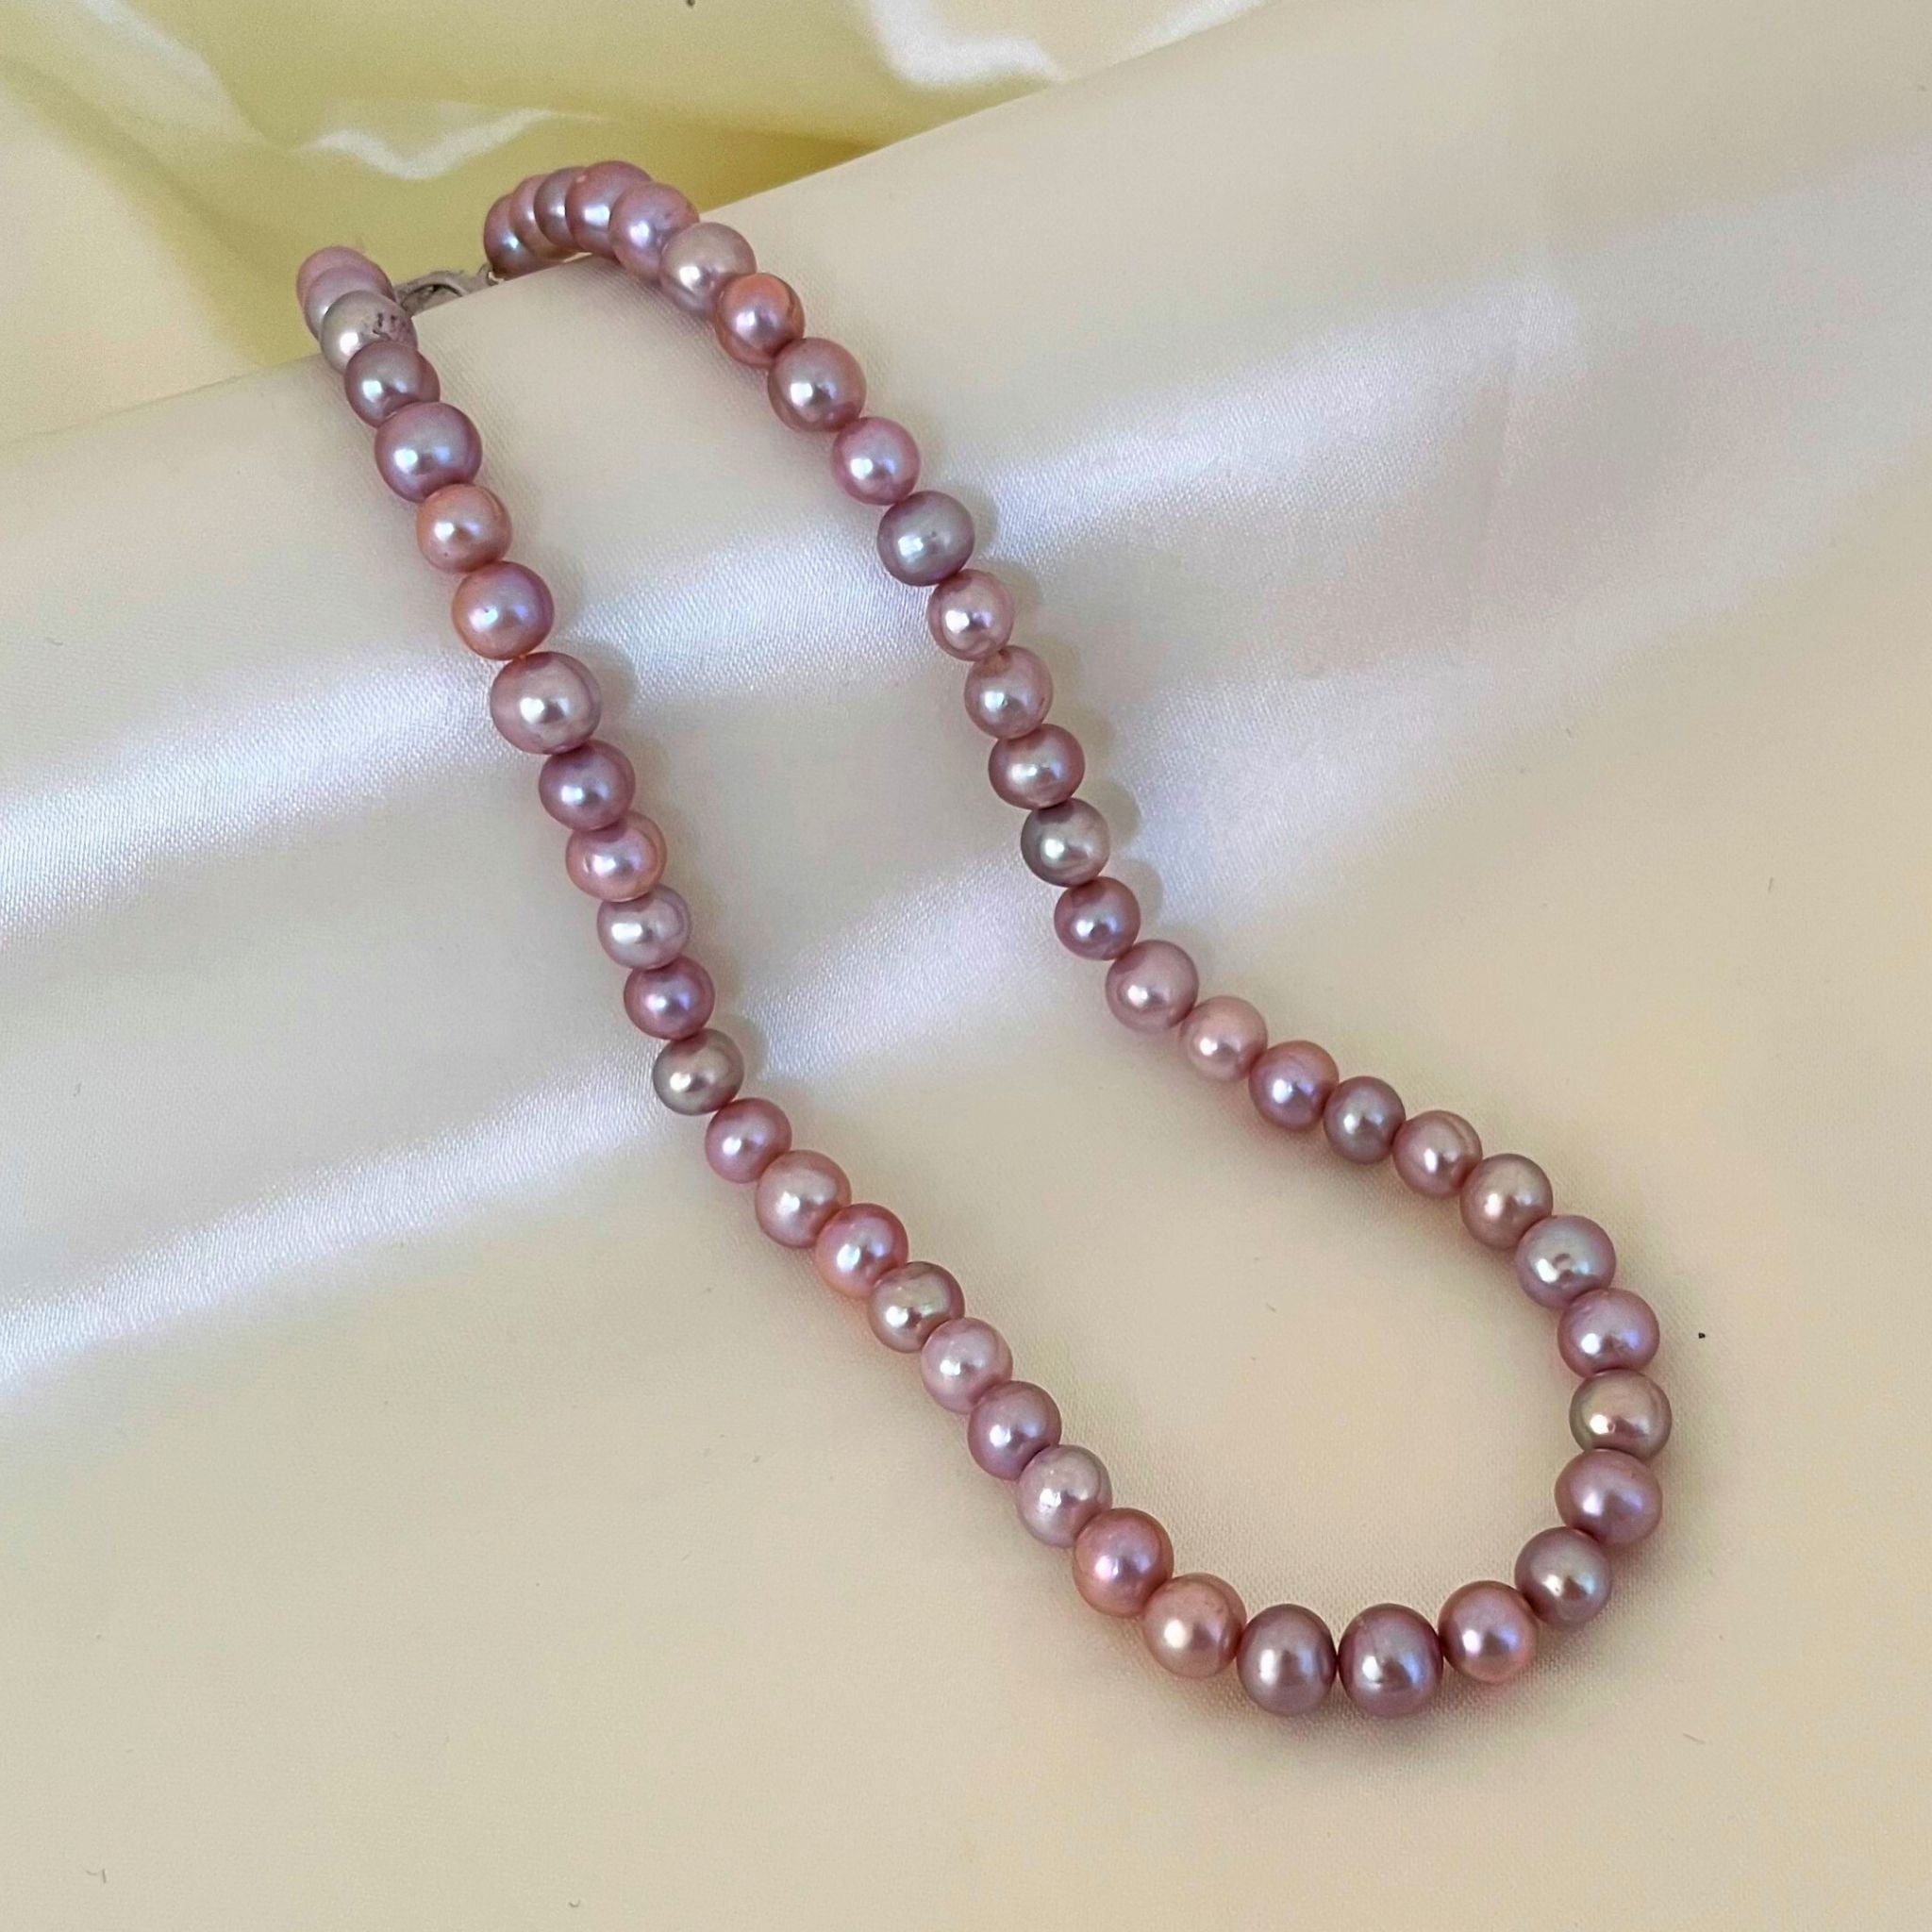 Elegant 8.5-10mm White & Lavender Two-row Pearl Necklace in Sterling Silver  - YIDE Jewelry